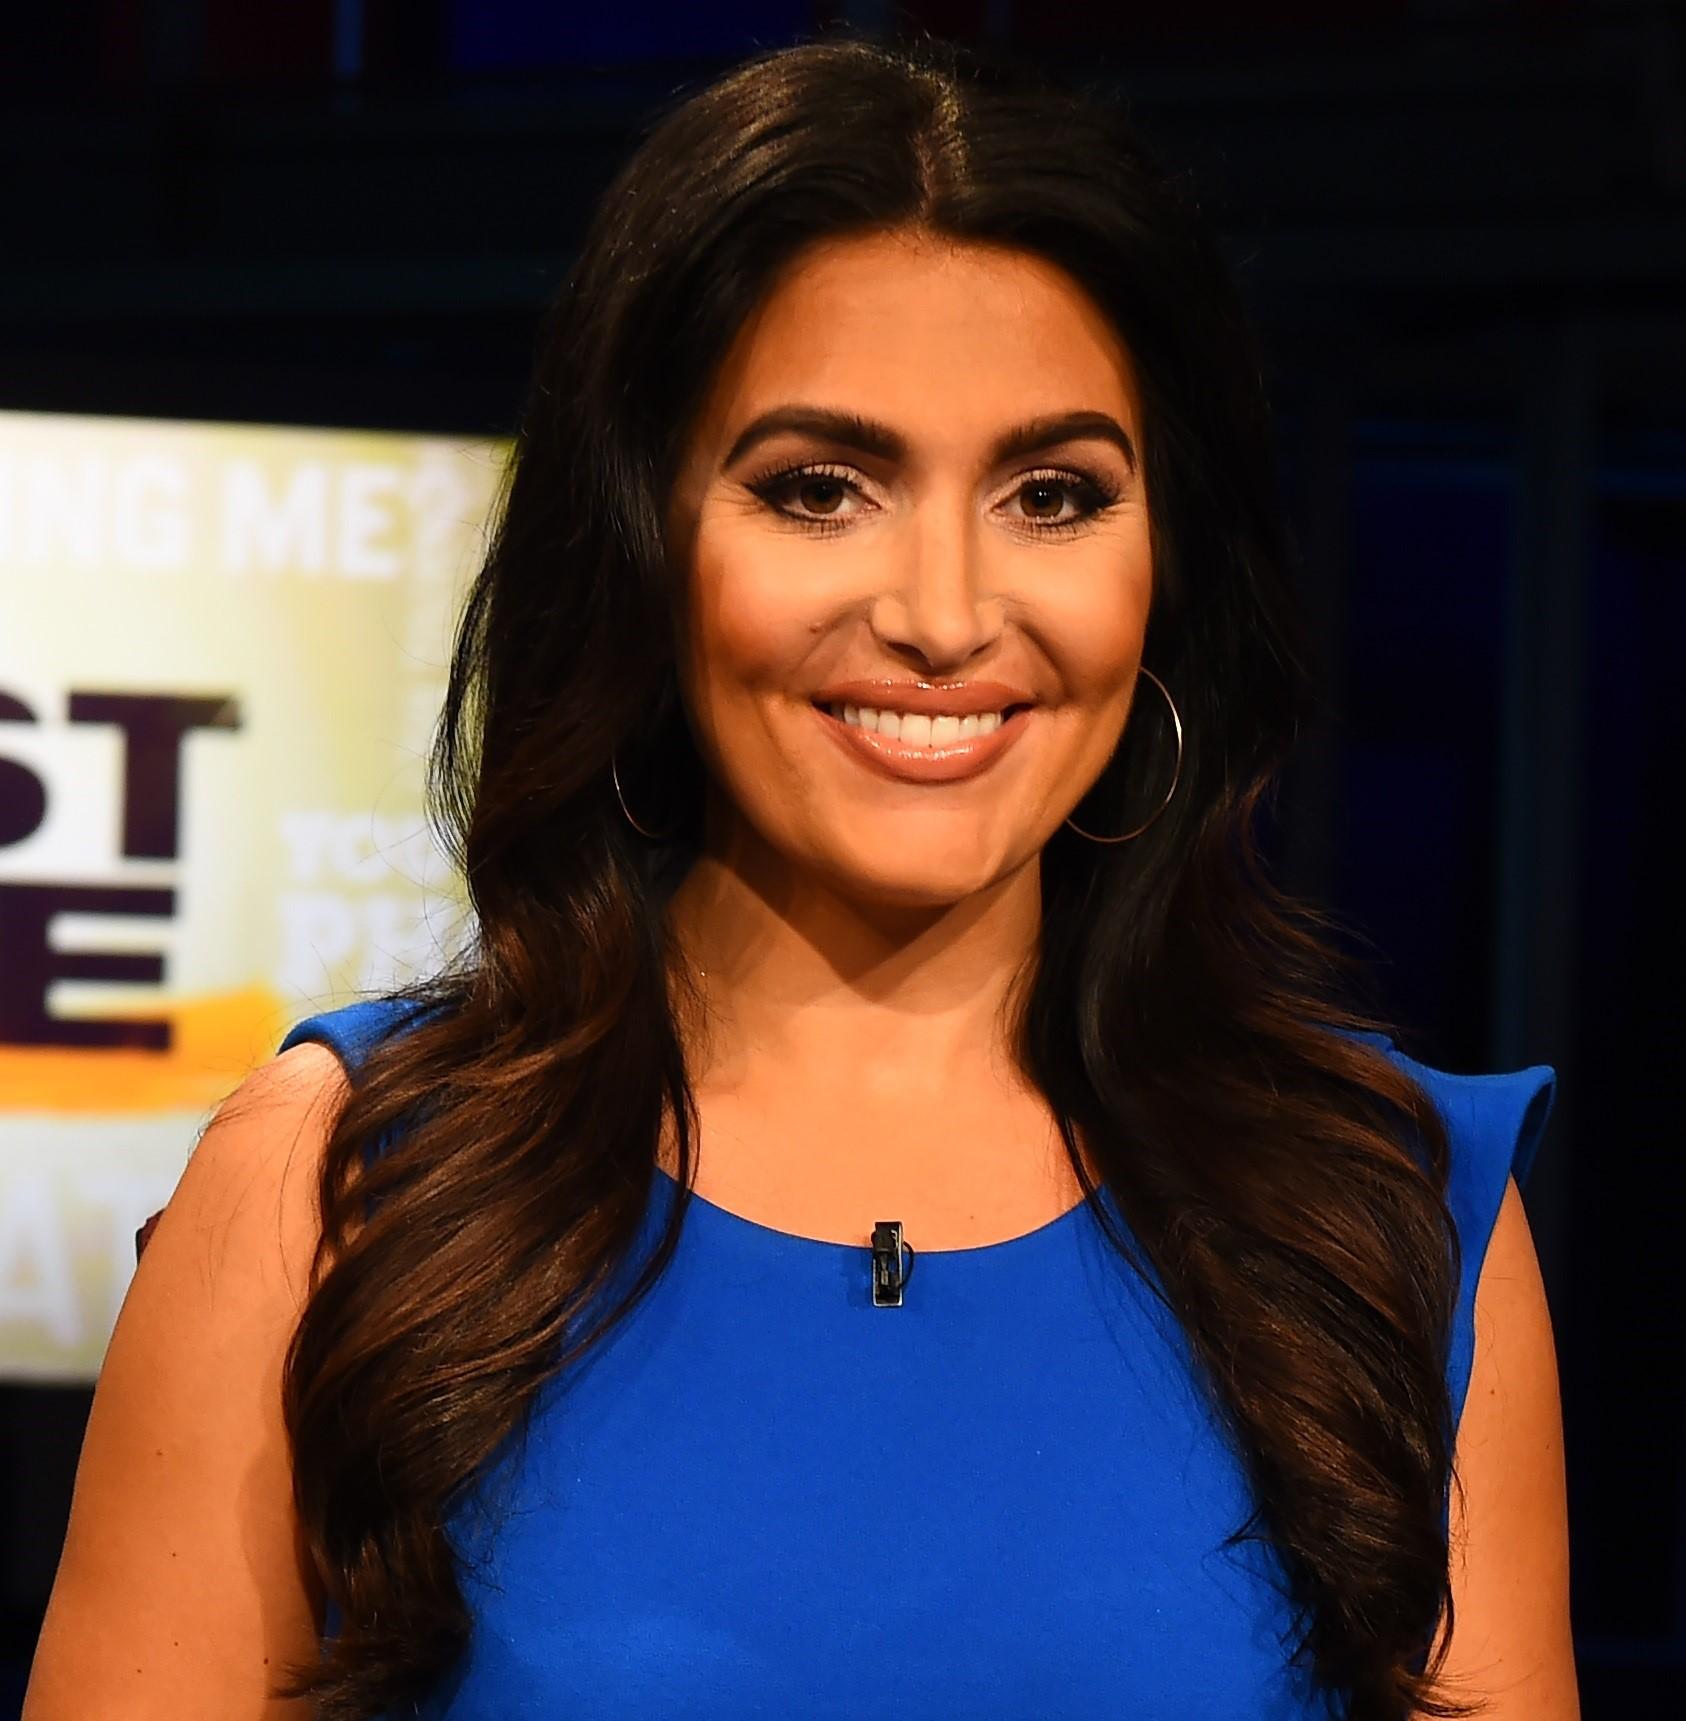 70+ Hot Pictures Of Molly Qerim Are So Damn Sexy That We Don’t Deserve Her 22